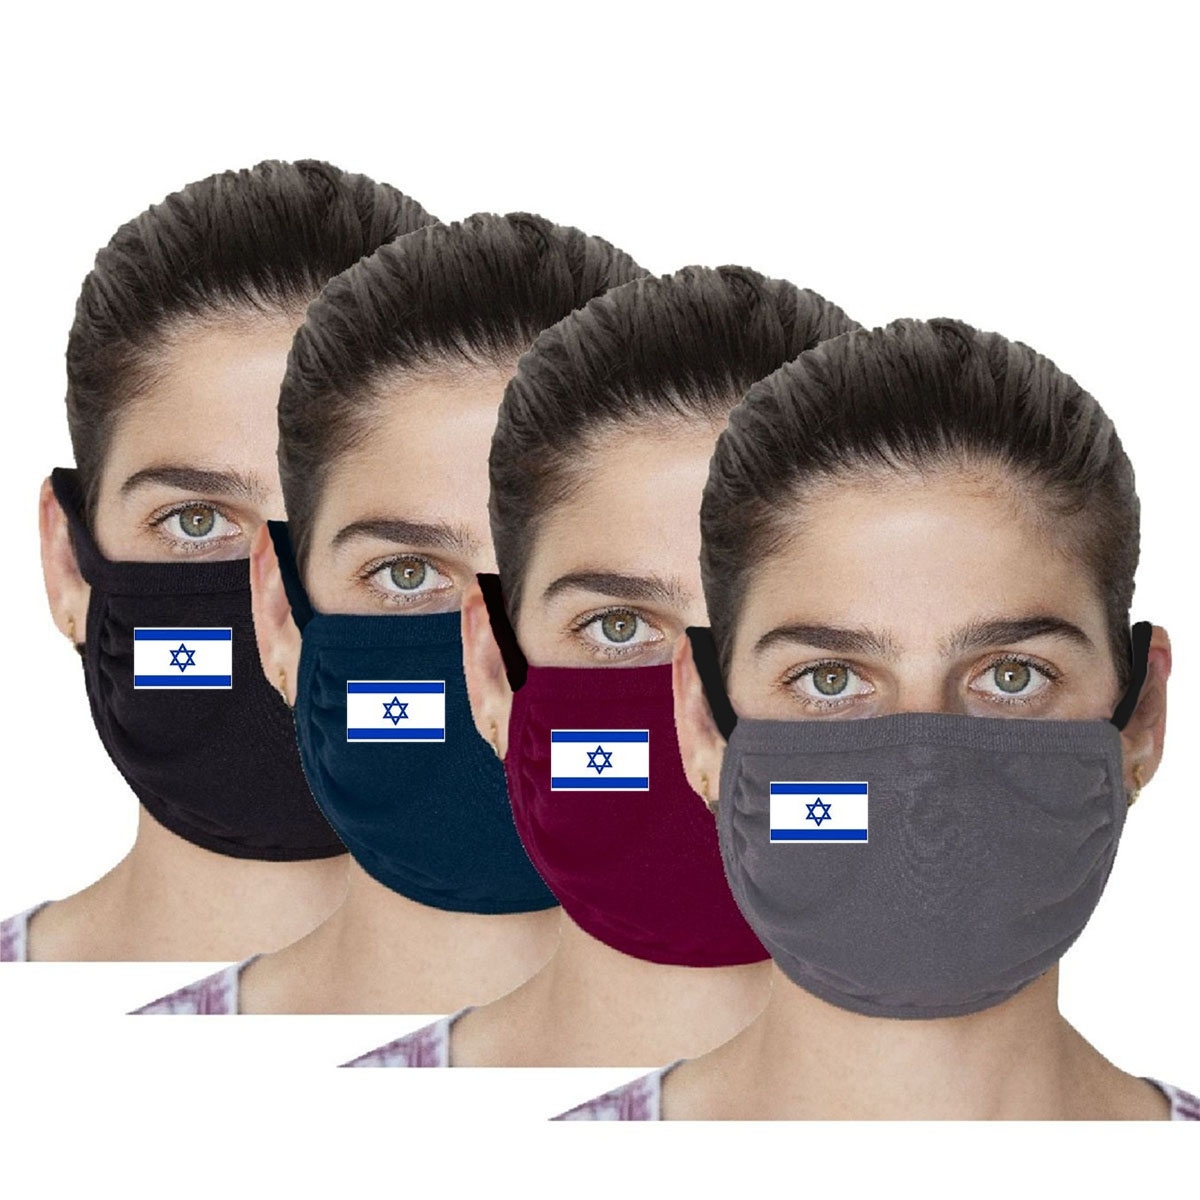 Multicolored Unisex Double-Layered Reusable Face Masks With Logo of Your Choice (100 units) - 1